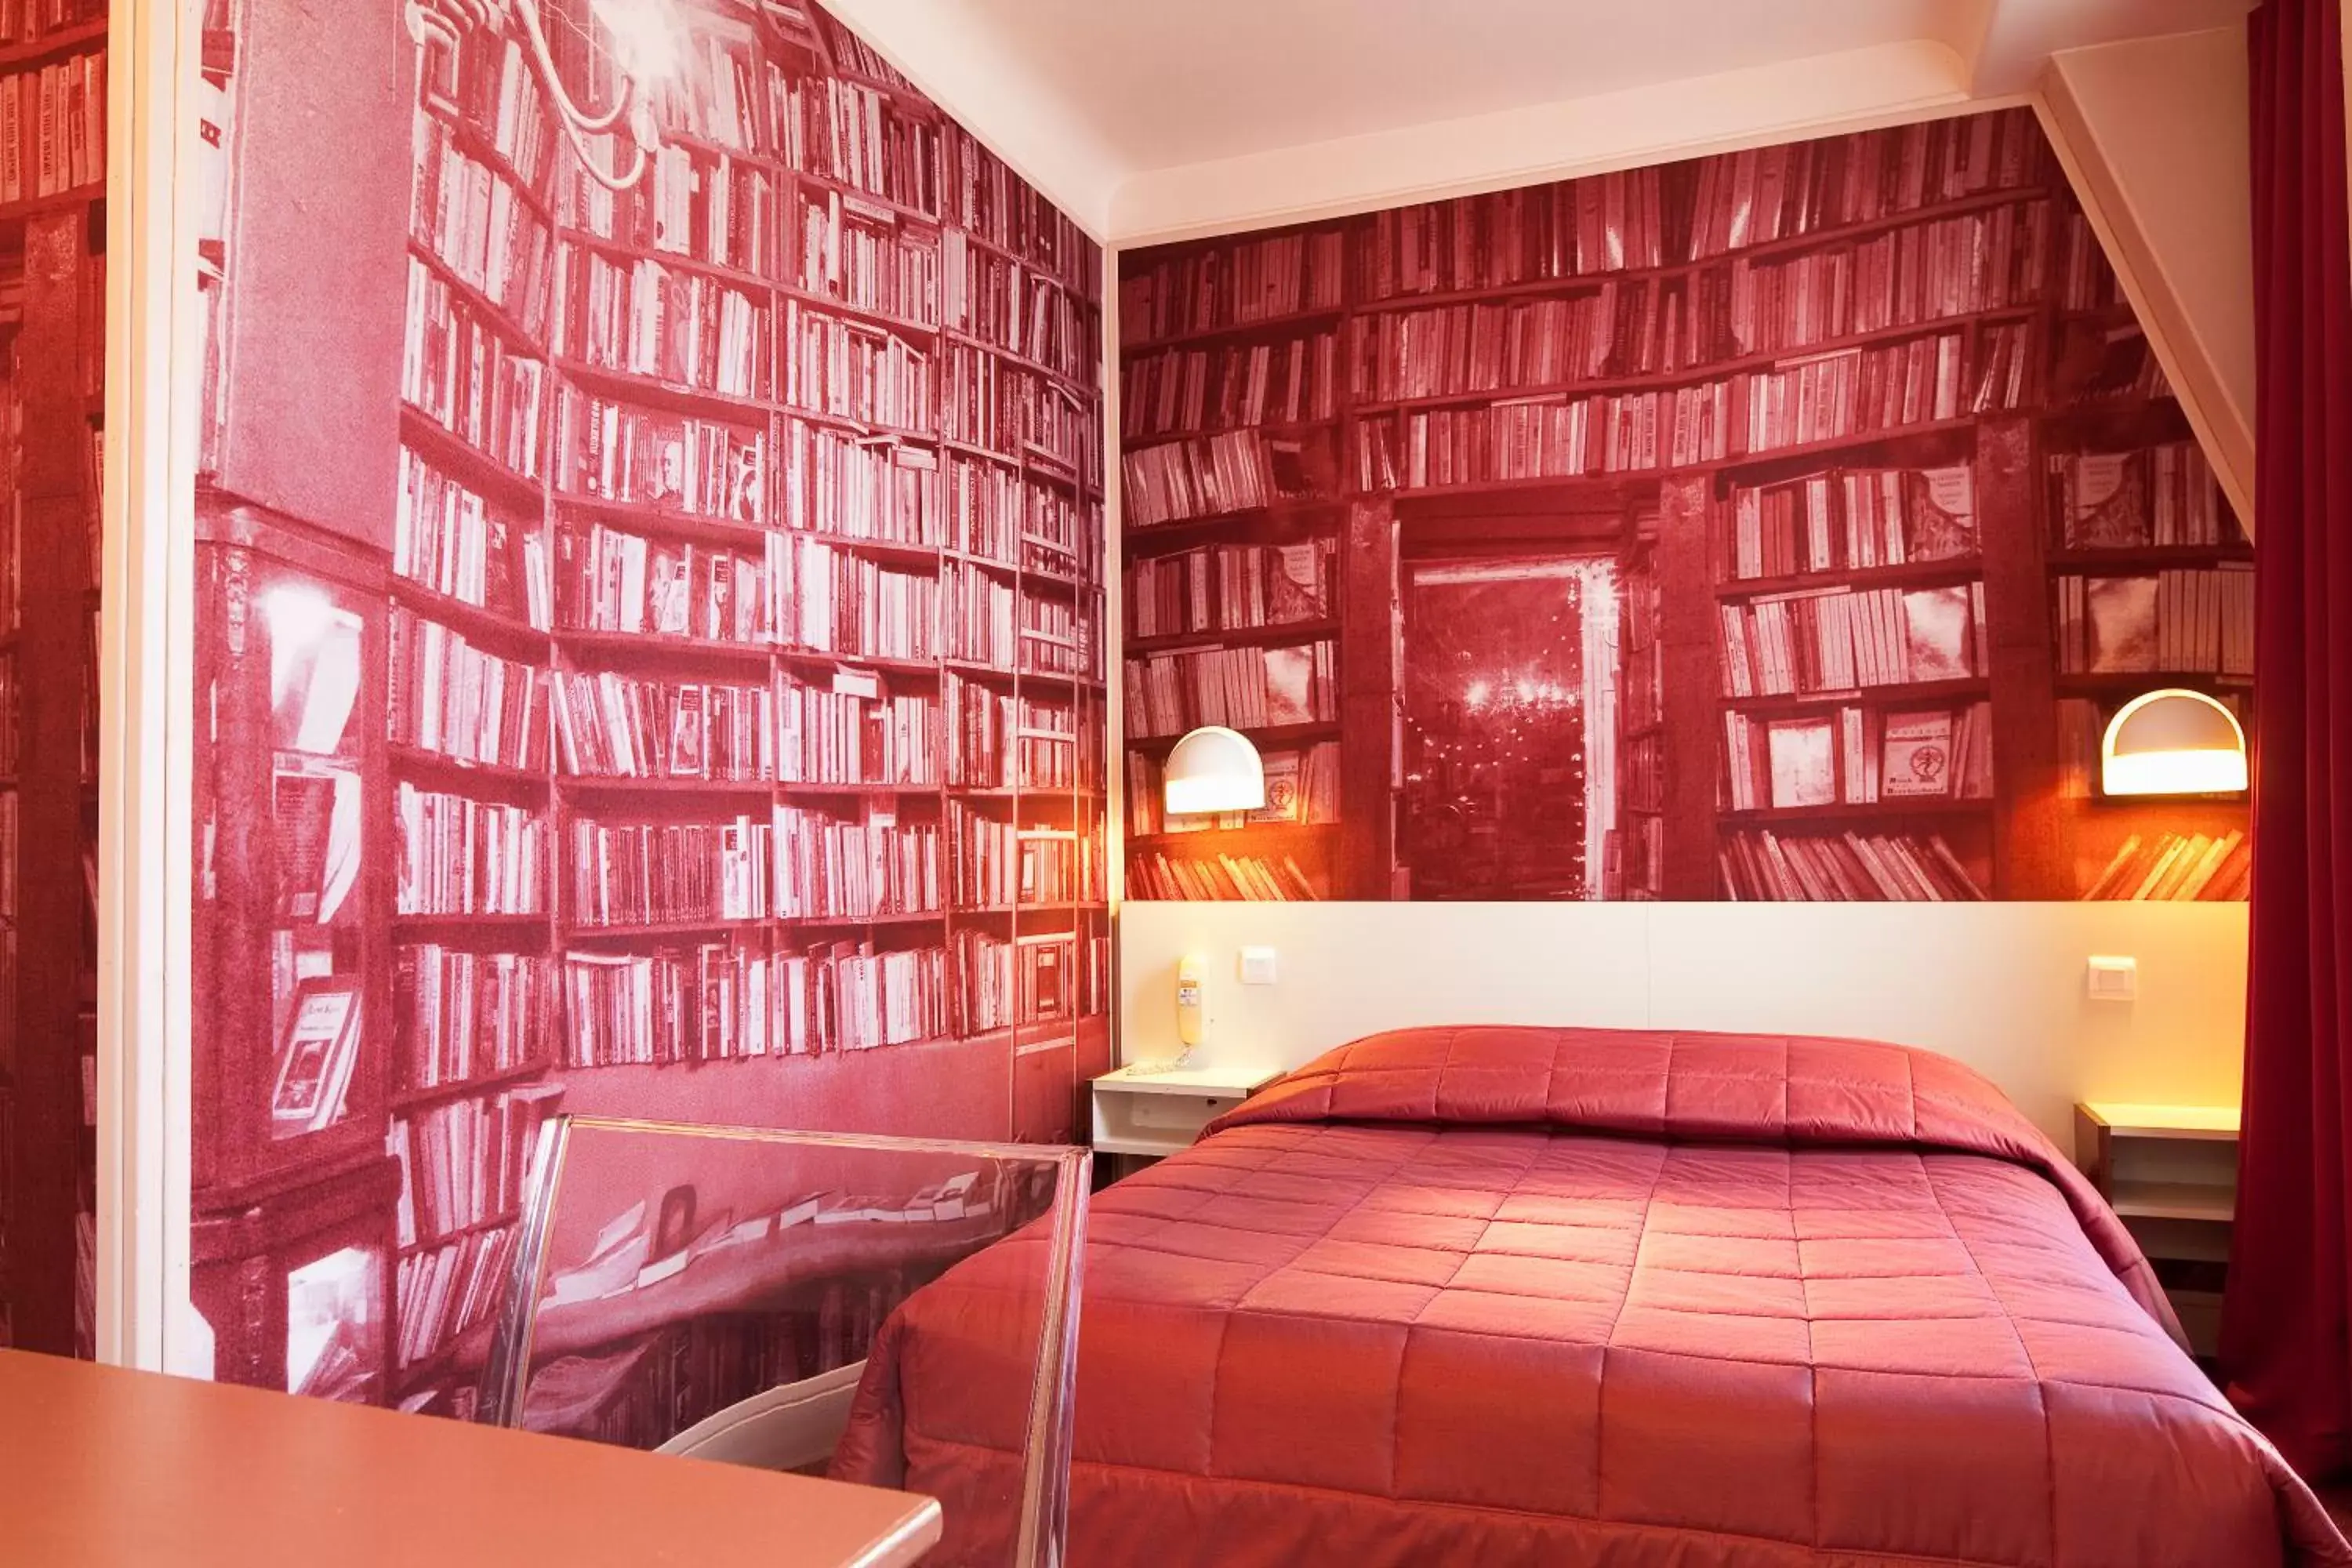 Bed, Library in Hotel Perreyve